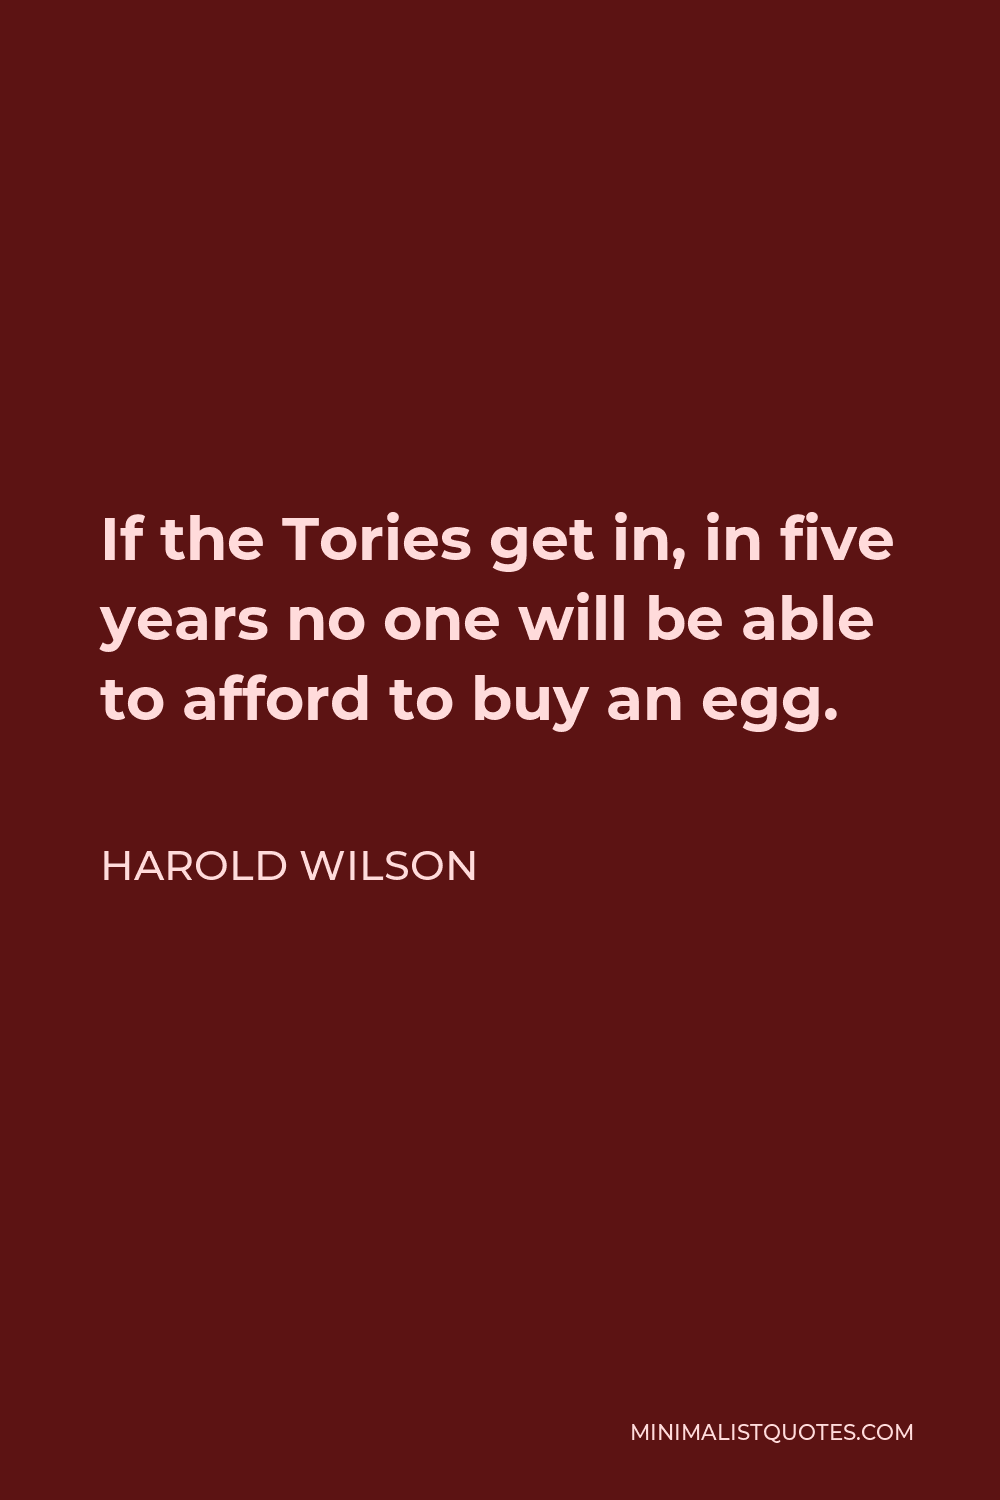 Harold Wilson Quote - If the Tories get in, in five years no one will be able to afford to buy an egg.